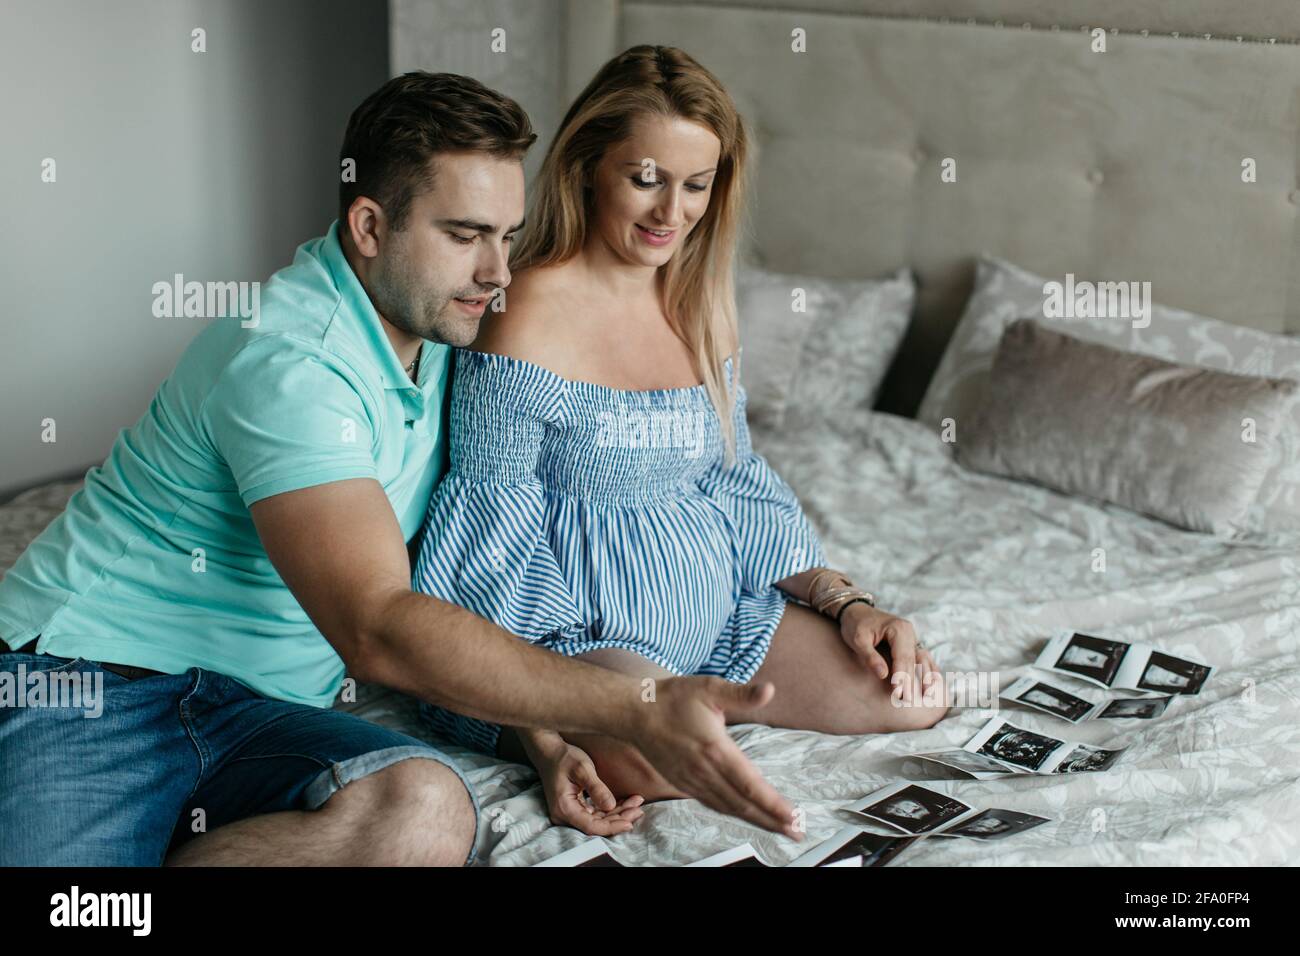 A portrait of a happy couple looking at an ultrasound of their baby. A smiling pregnant woman sitting on a bed with her partner and looking at photos. Stock Photo